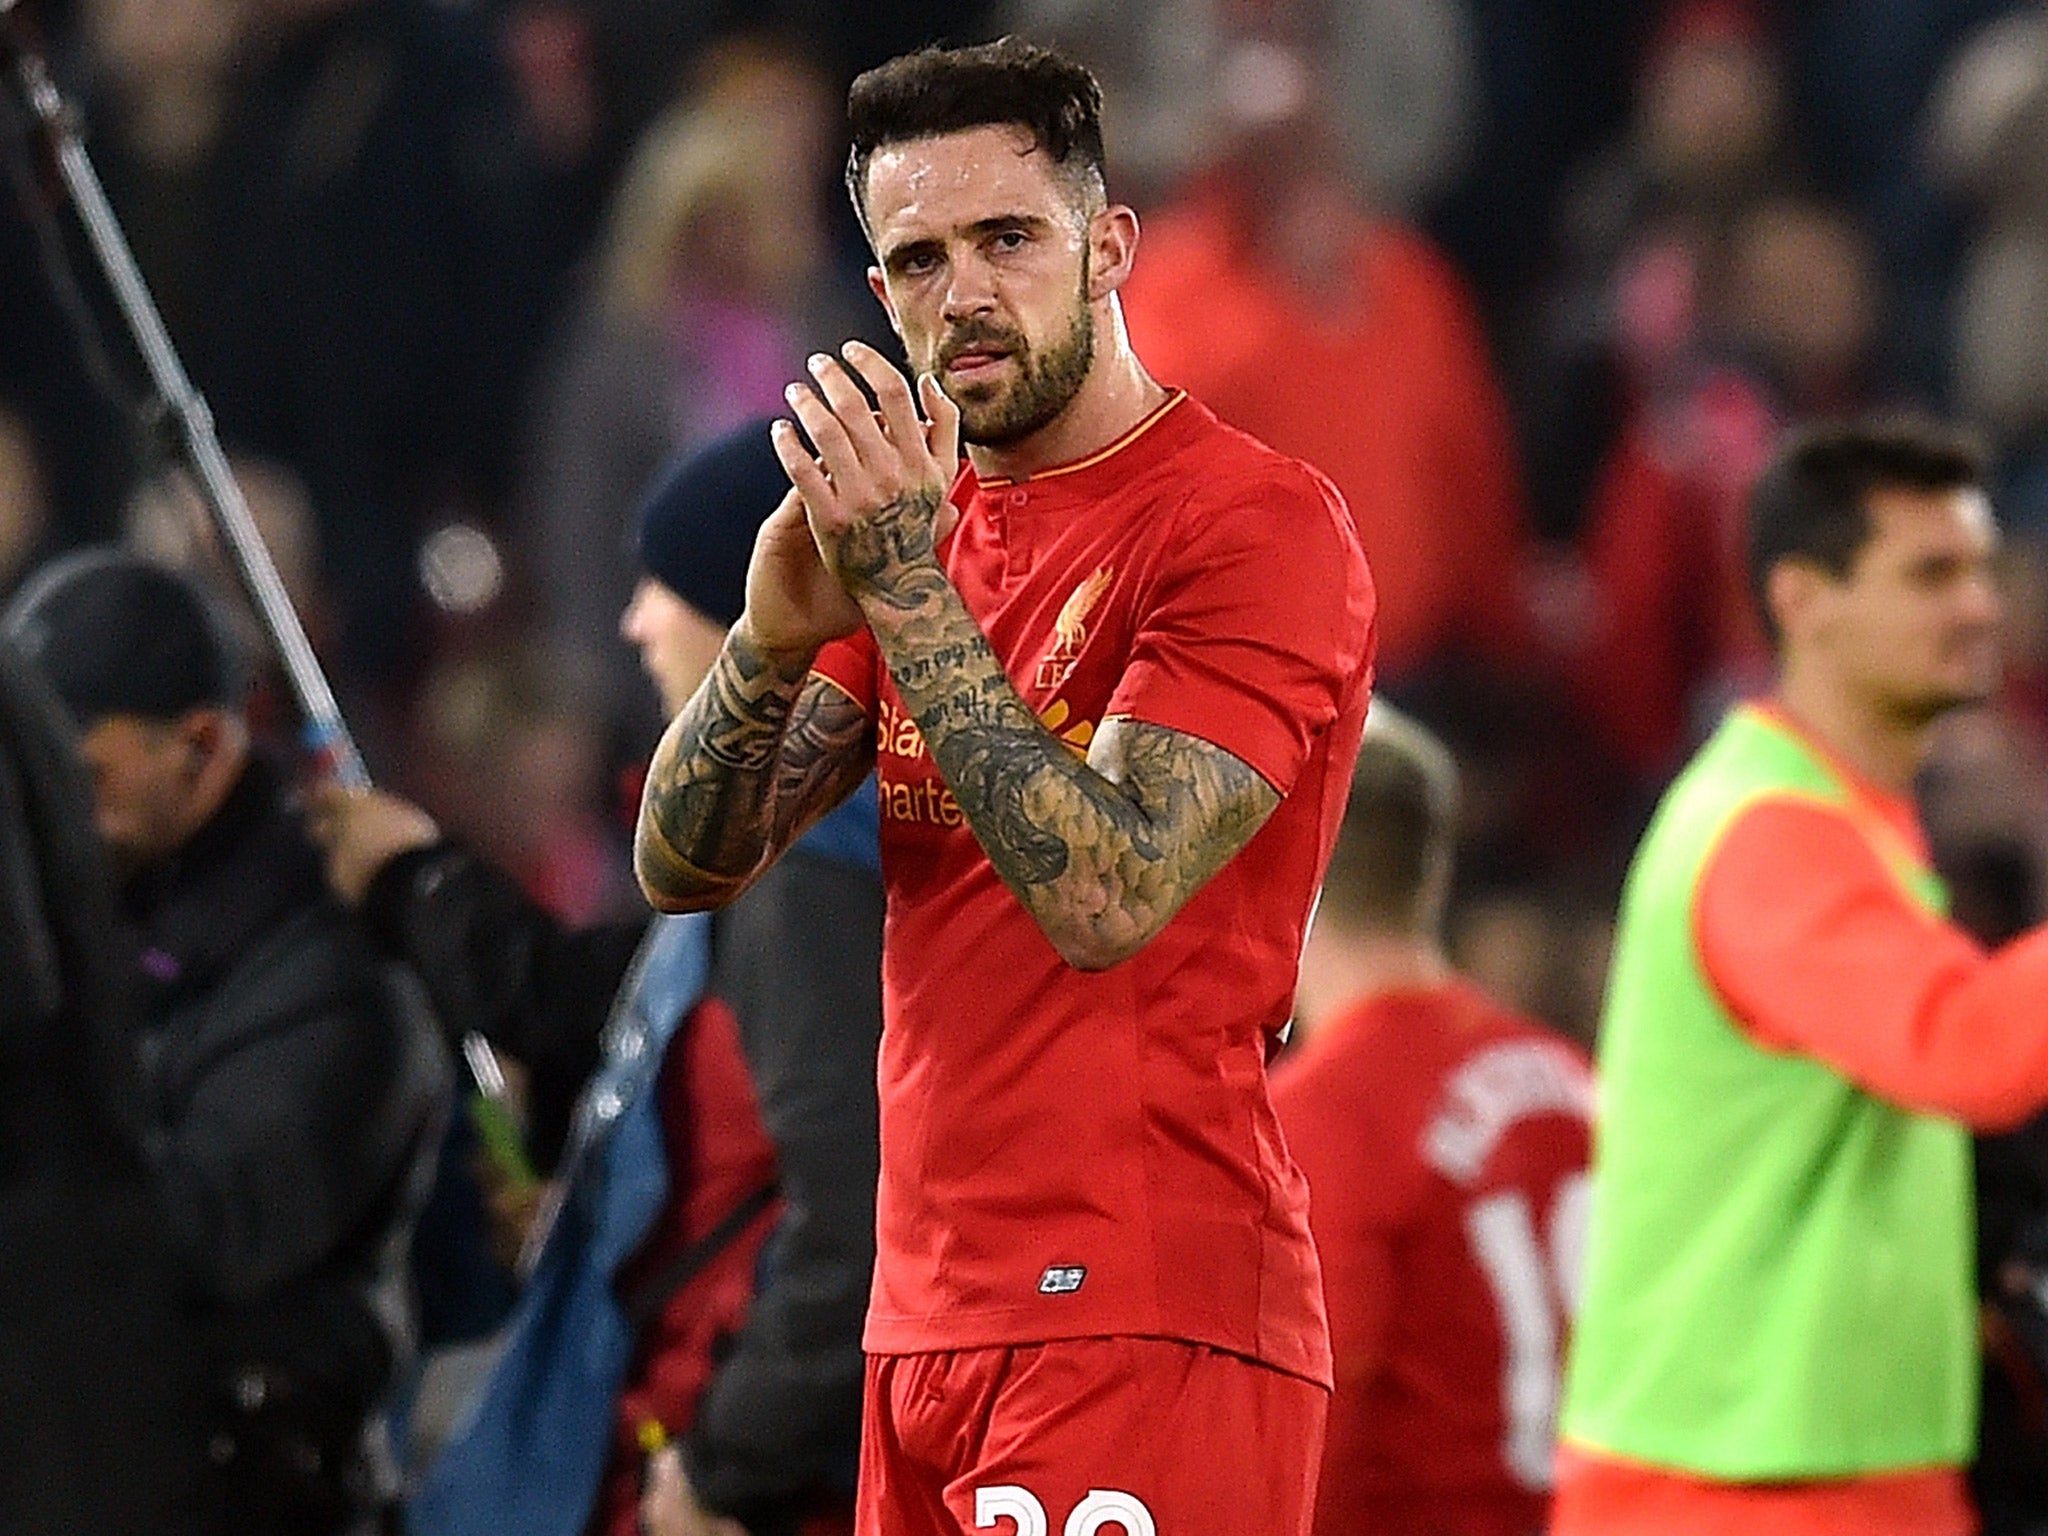 Danny Ings has been ruled out for the rest of the season with serious cartilage damage in his right knee